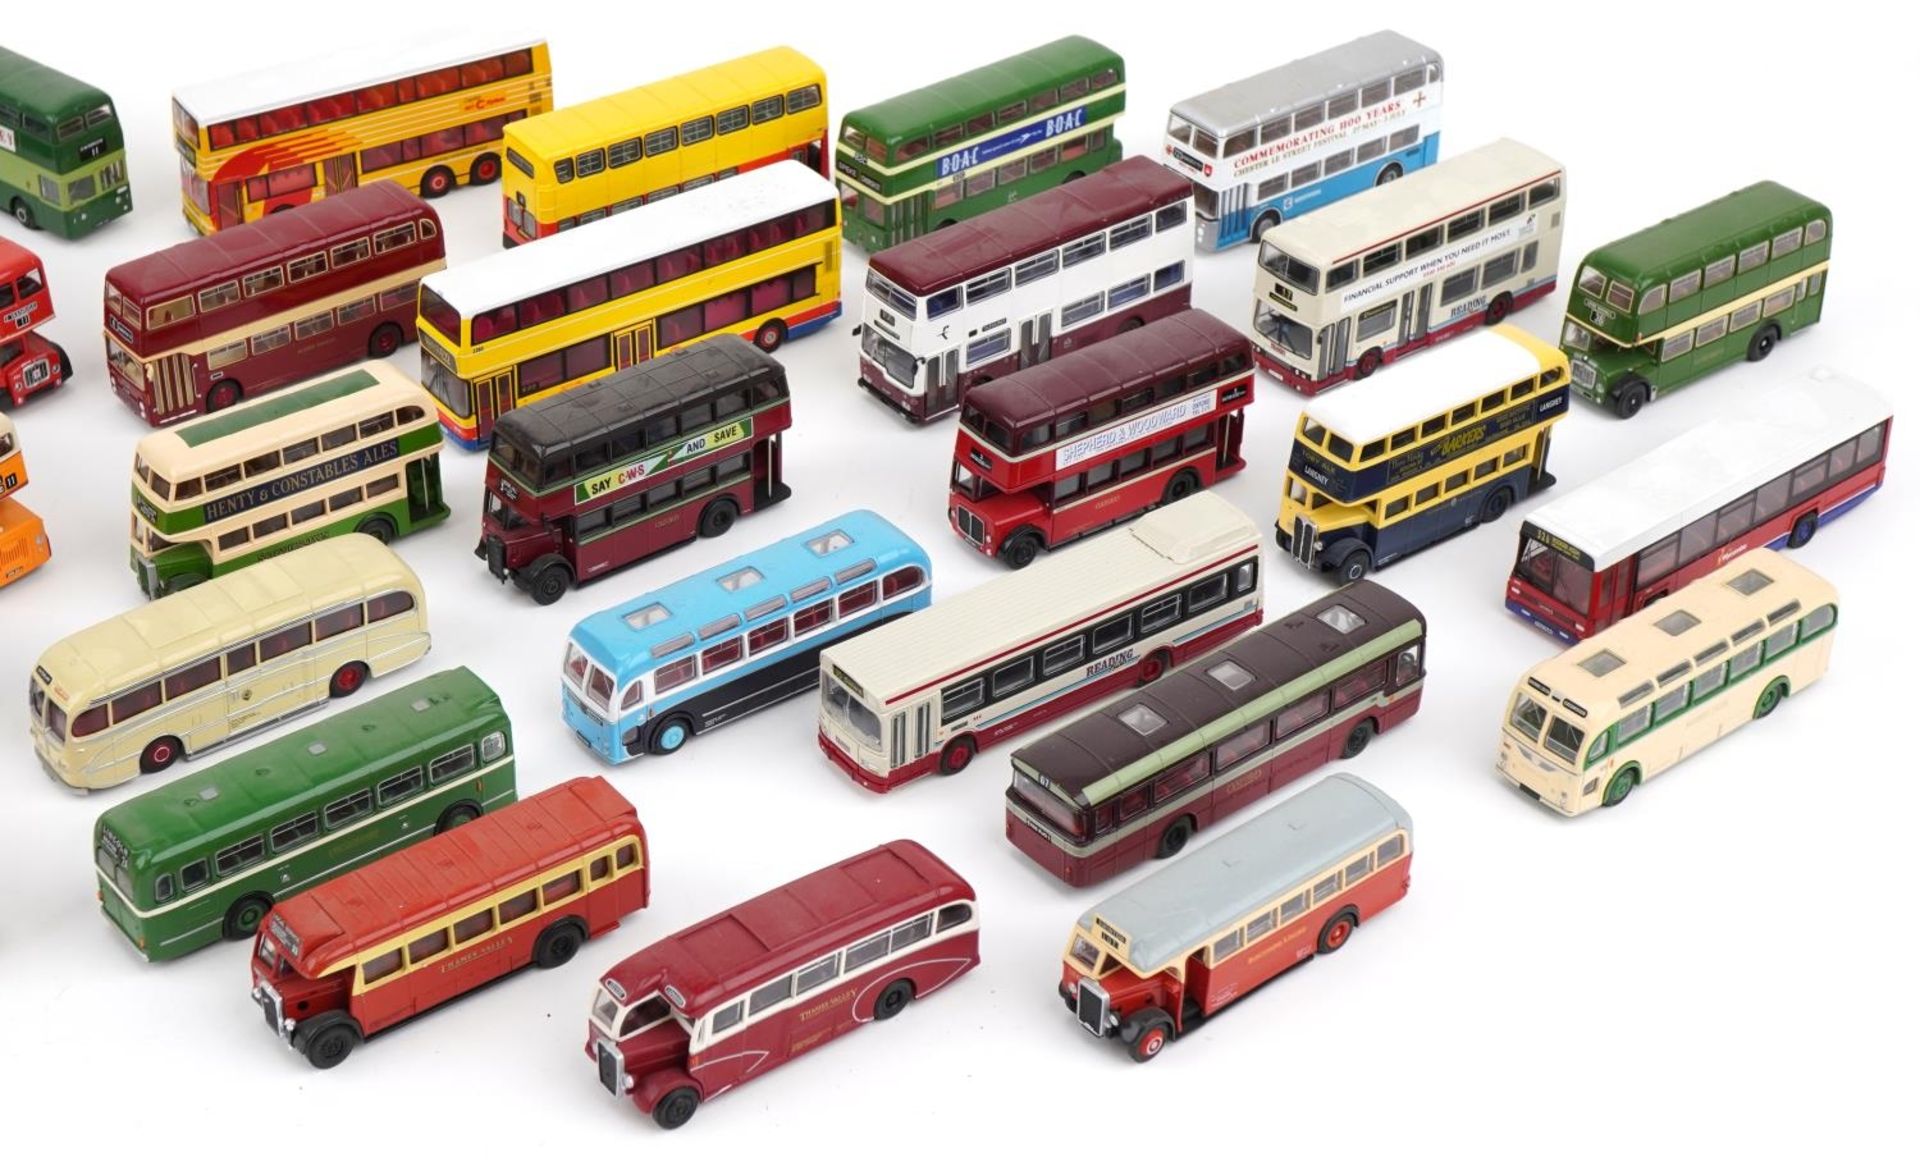 Large collection of diecast model buses, predominantly Corgi and Exclusive First Editions - Image 3 of 3